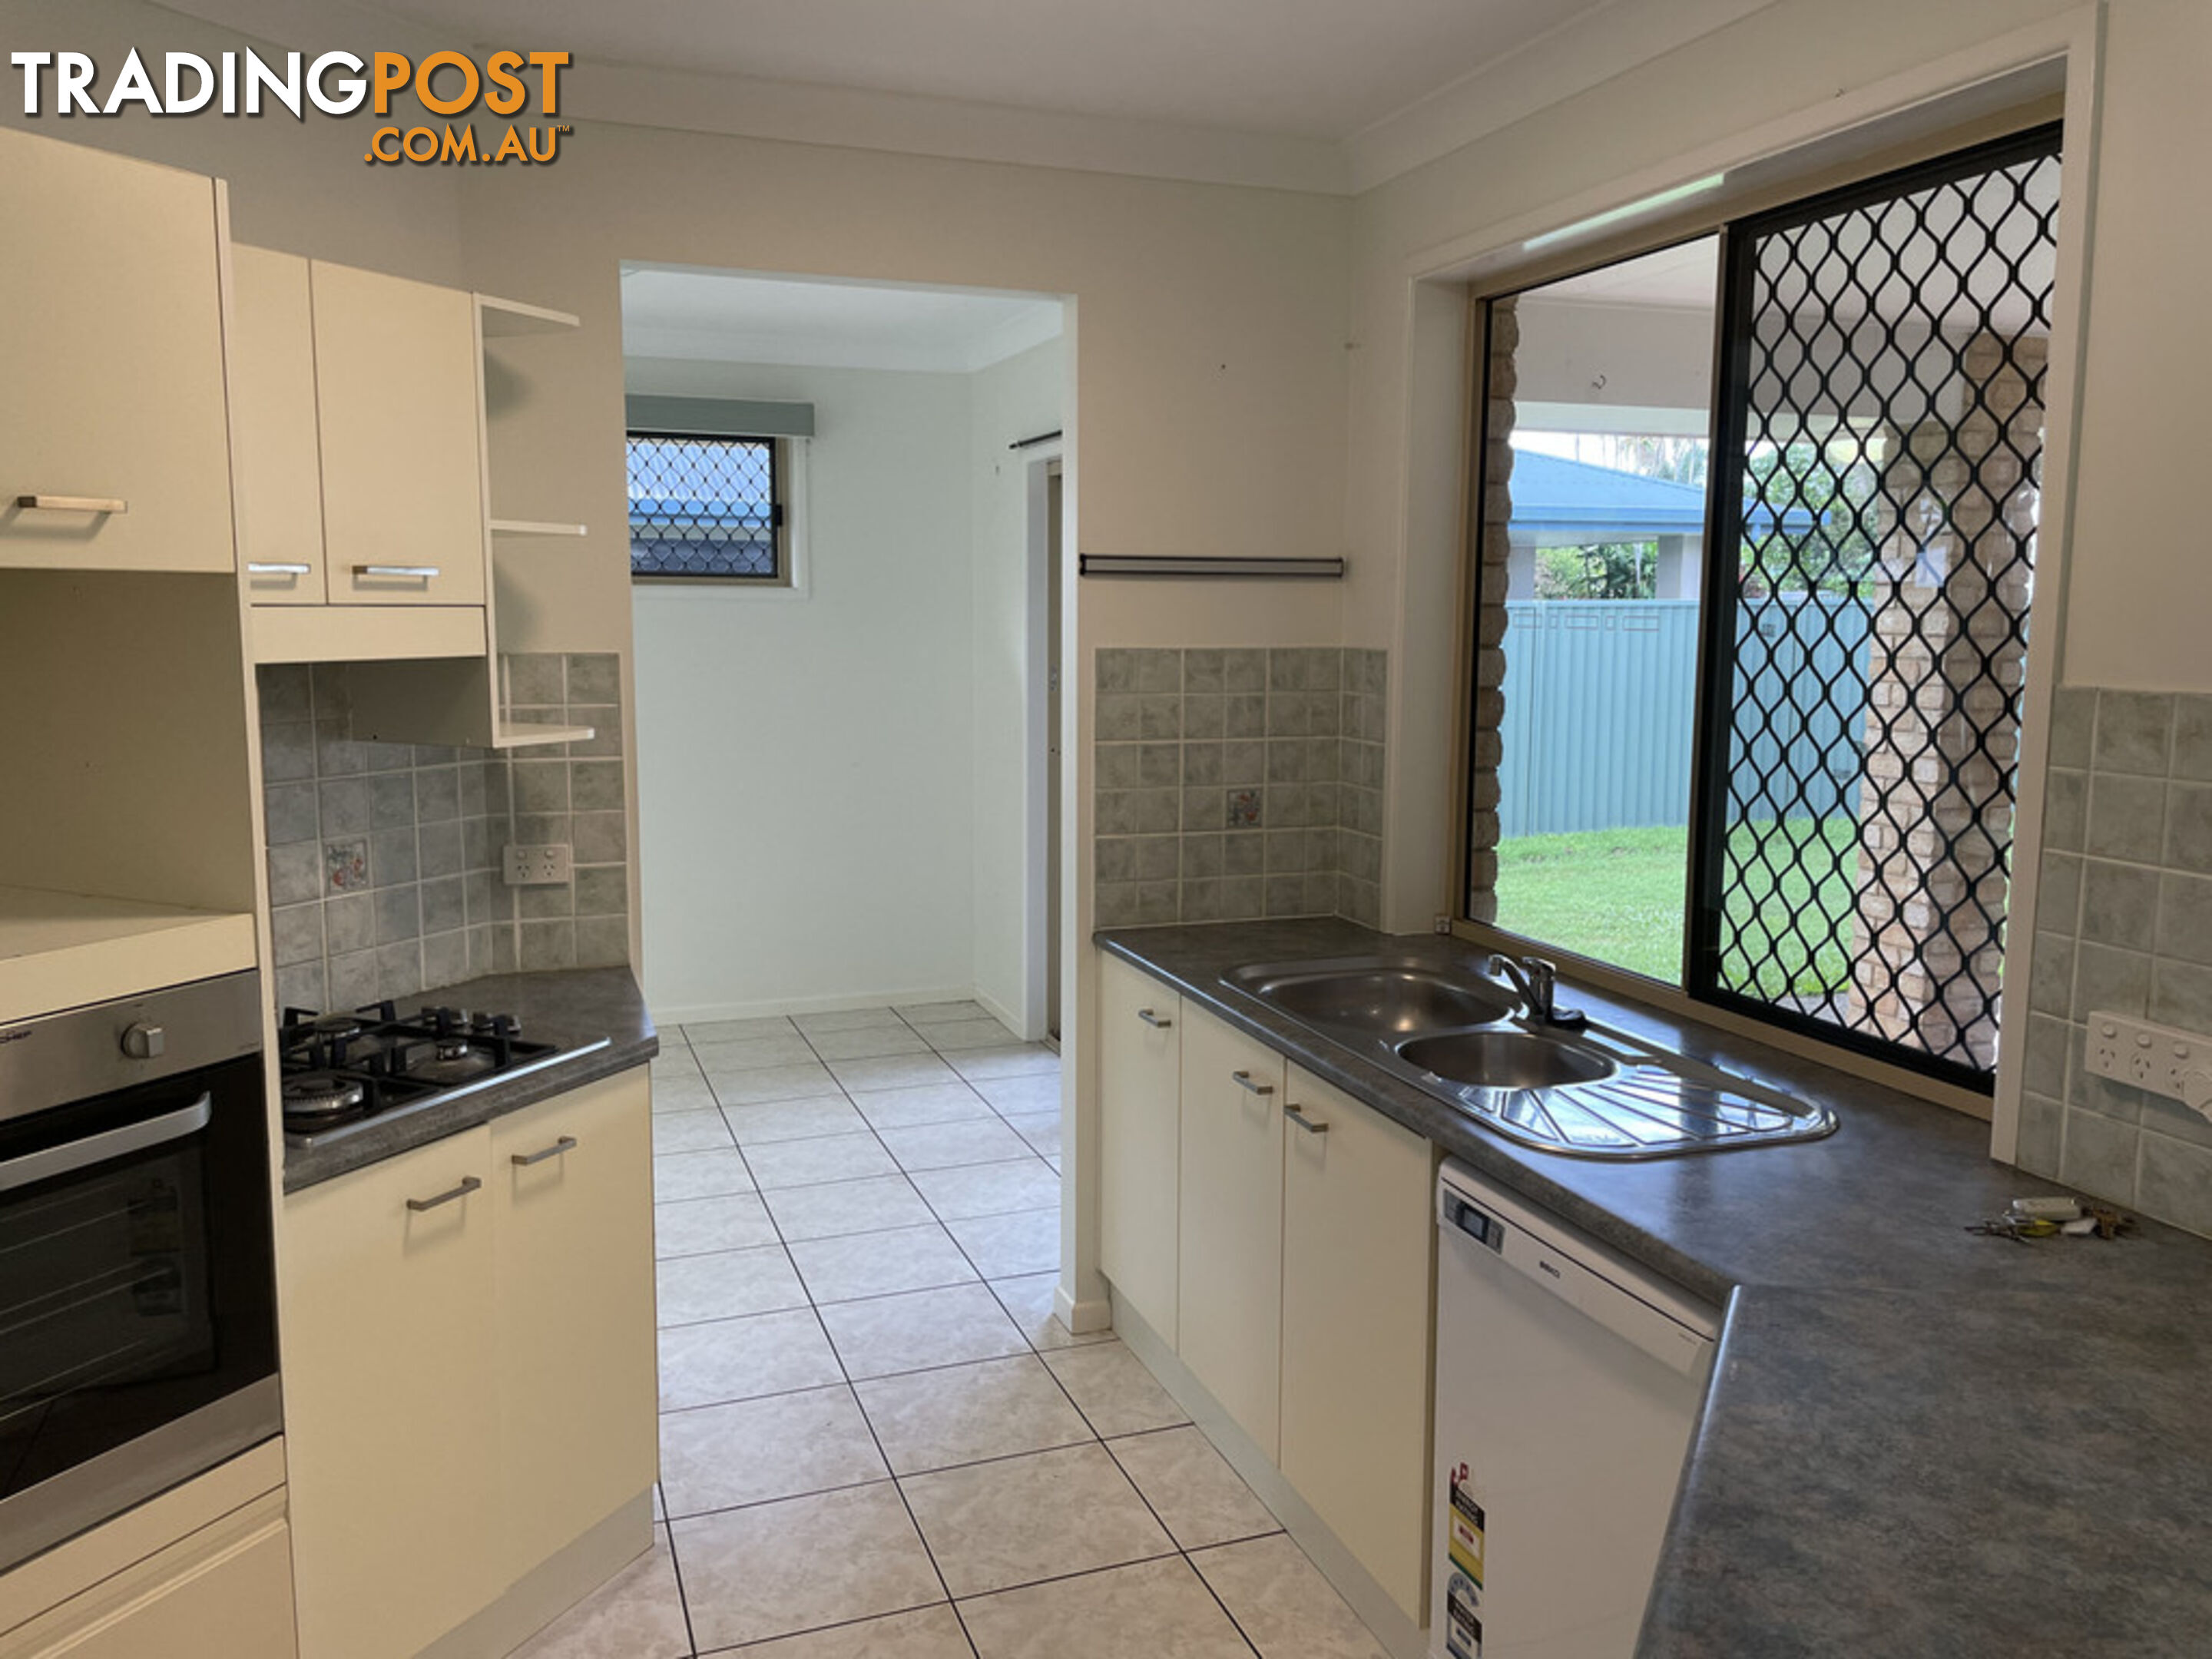 3 Coulthard Close NEWELL QLD 4873